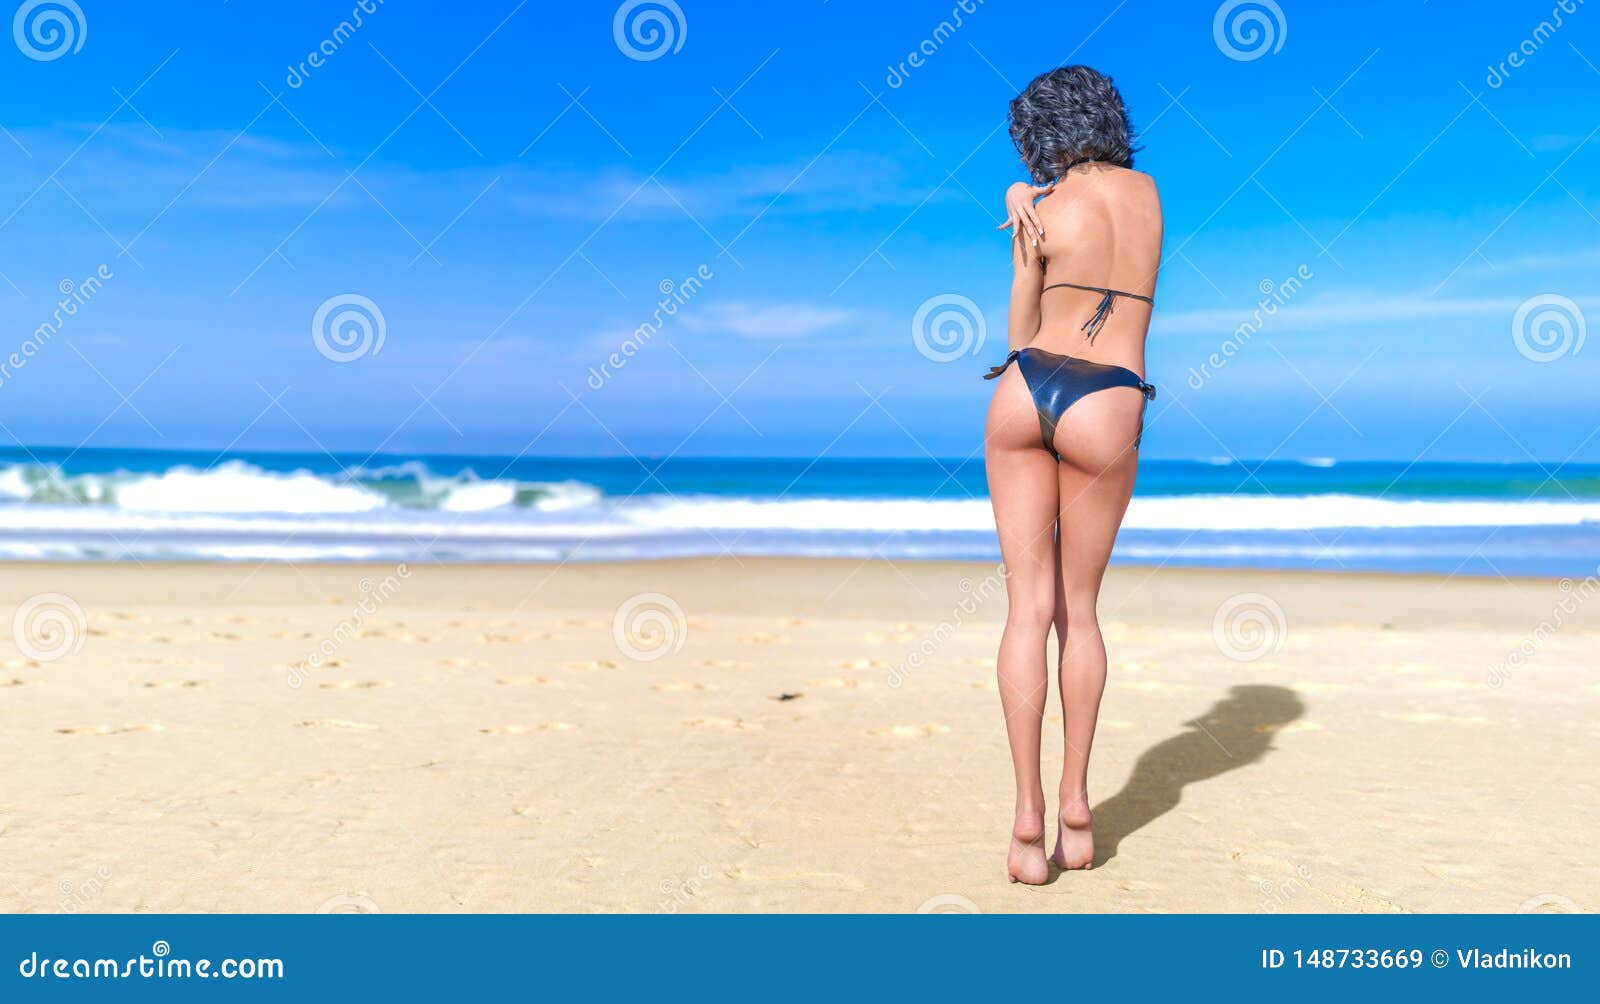 Candid Latinas laying on the beach